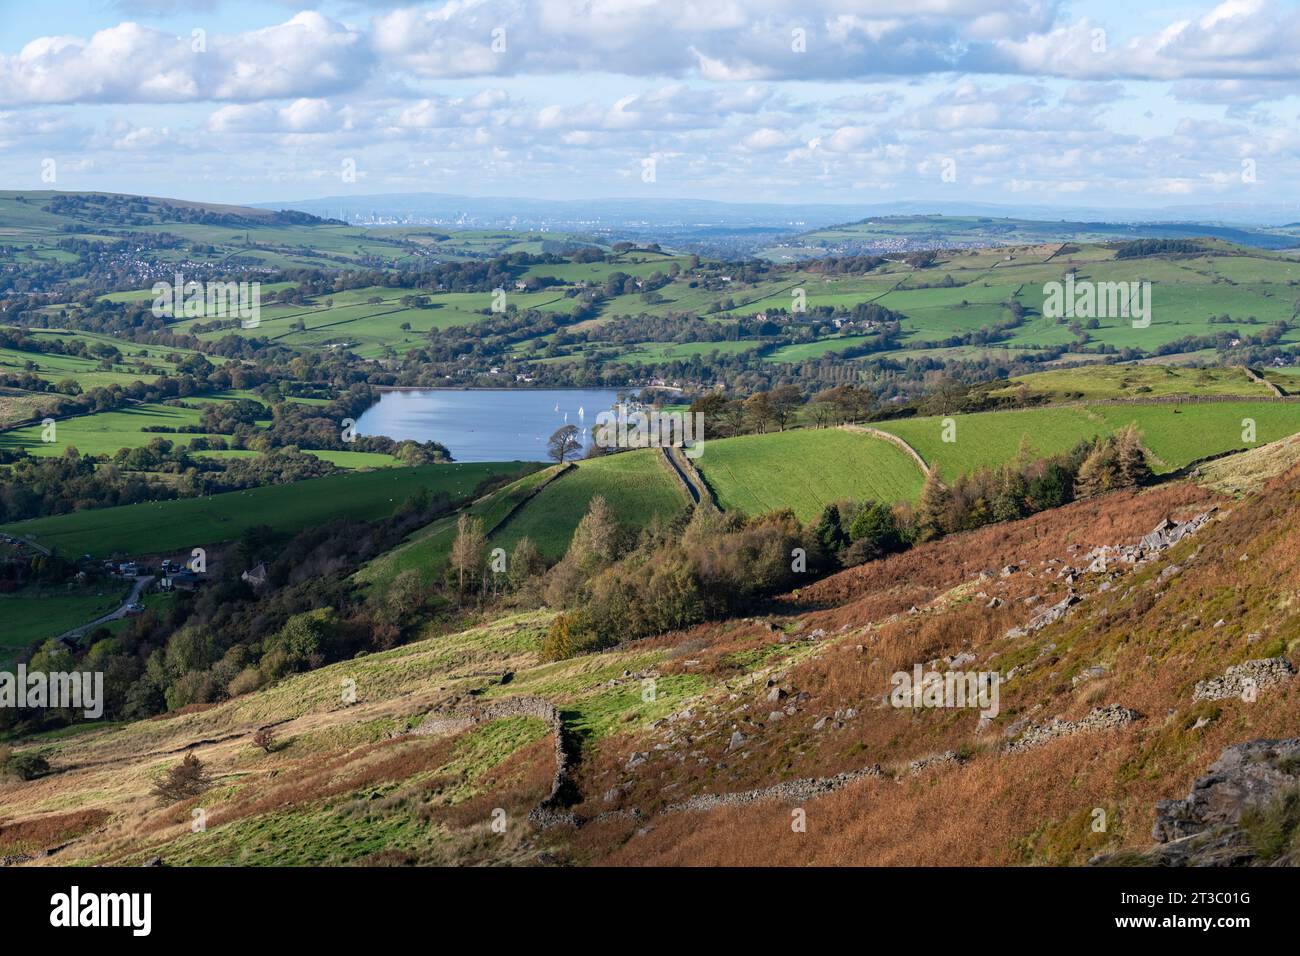 Combs reservoir seen from Combs Edge near Chapel-en-le-Frith in Derbyshire, England. Stock Photo